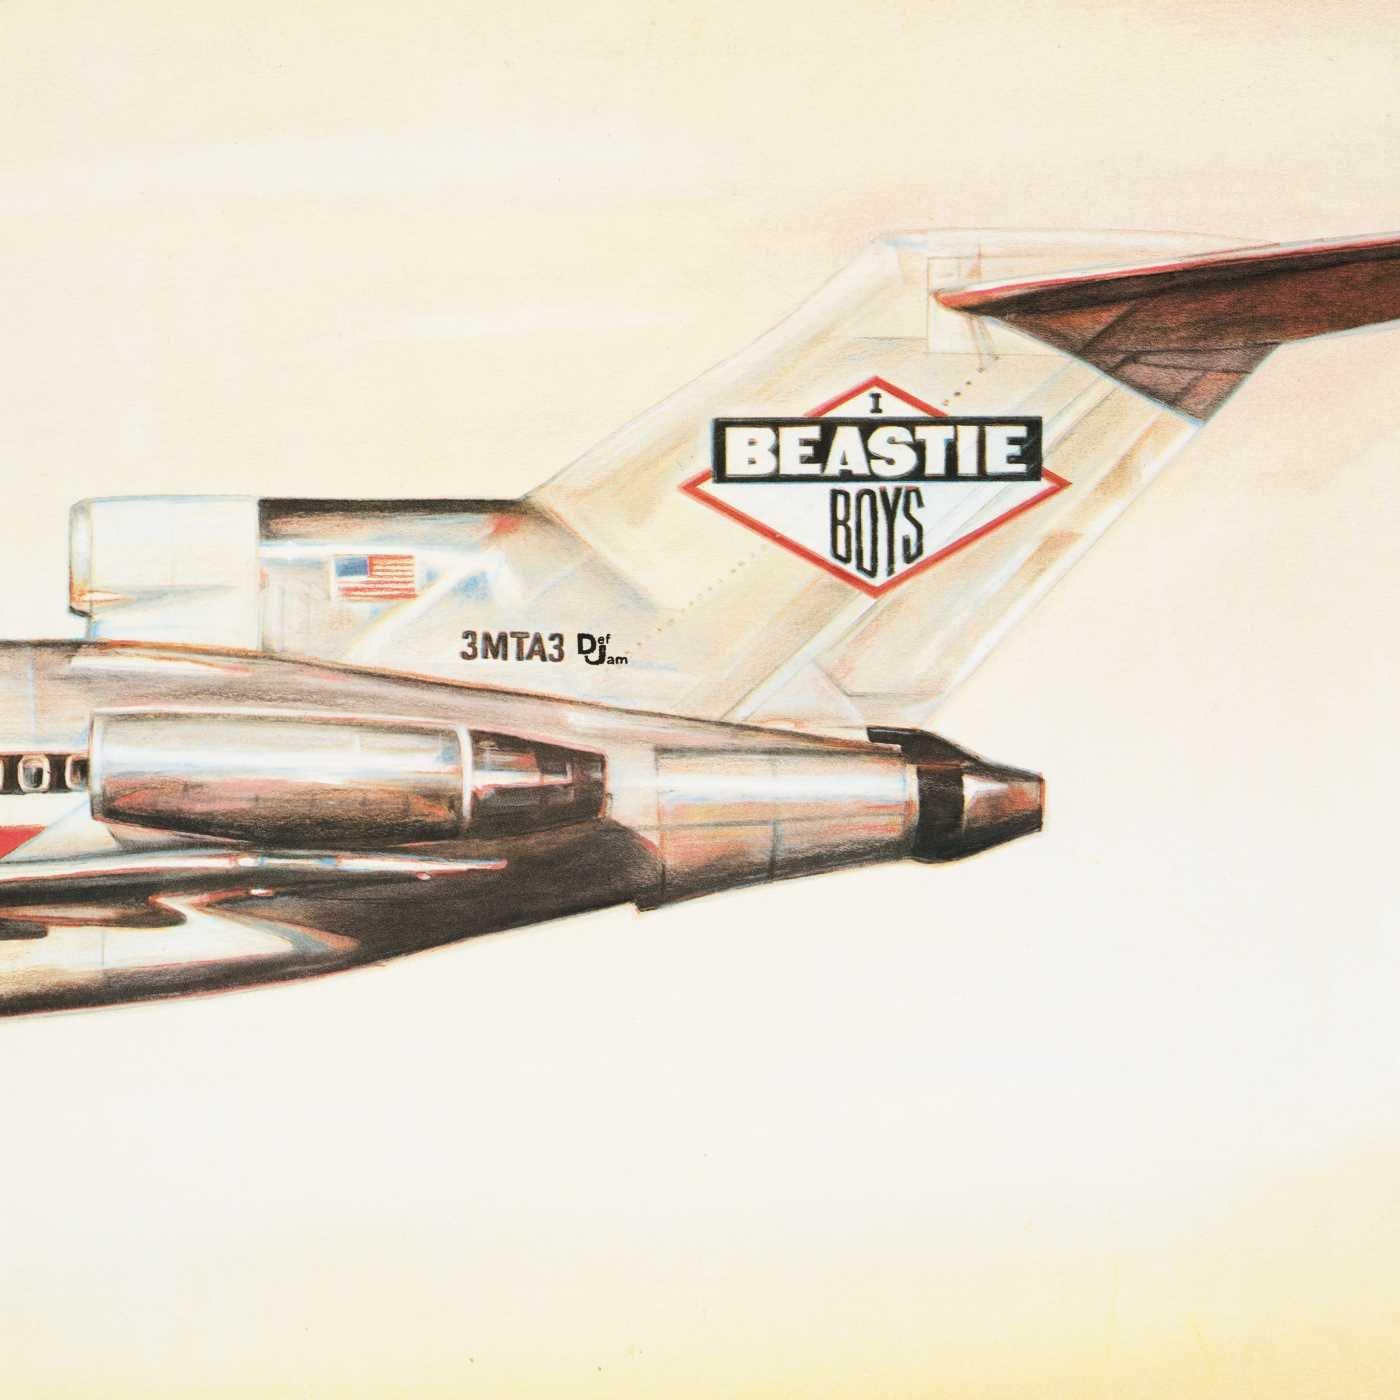 20 Albums, 20 Days: Licensed to Ill